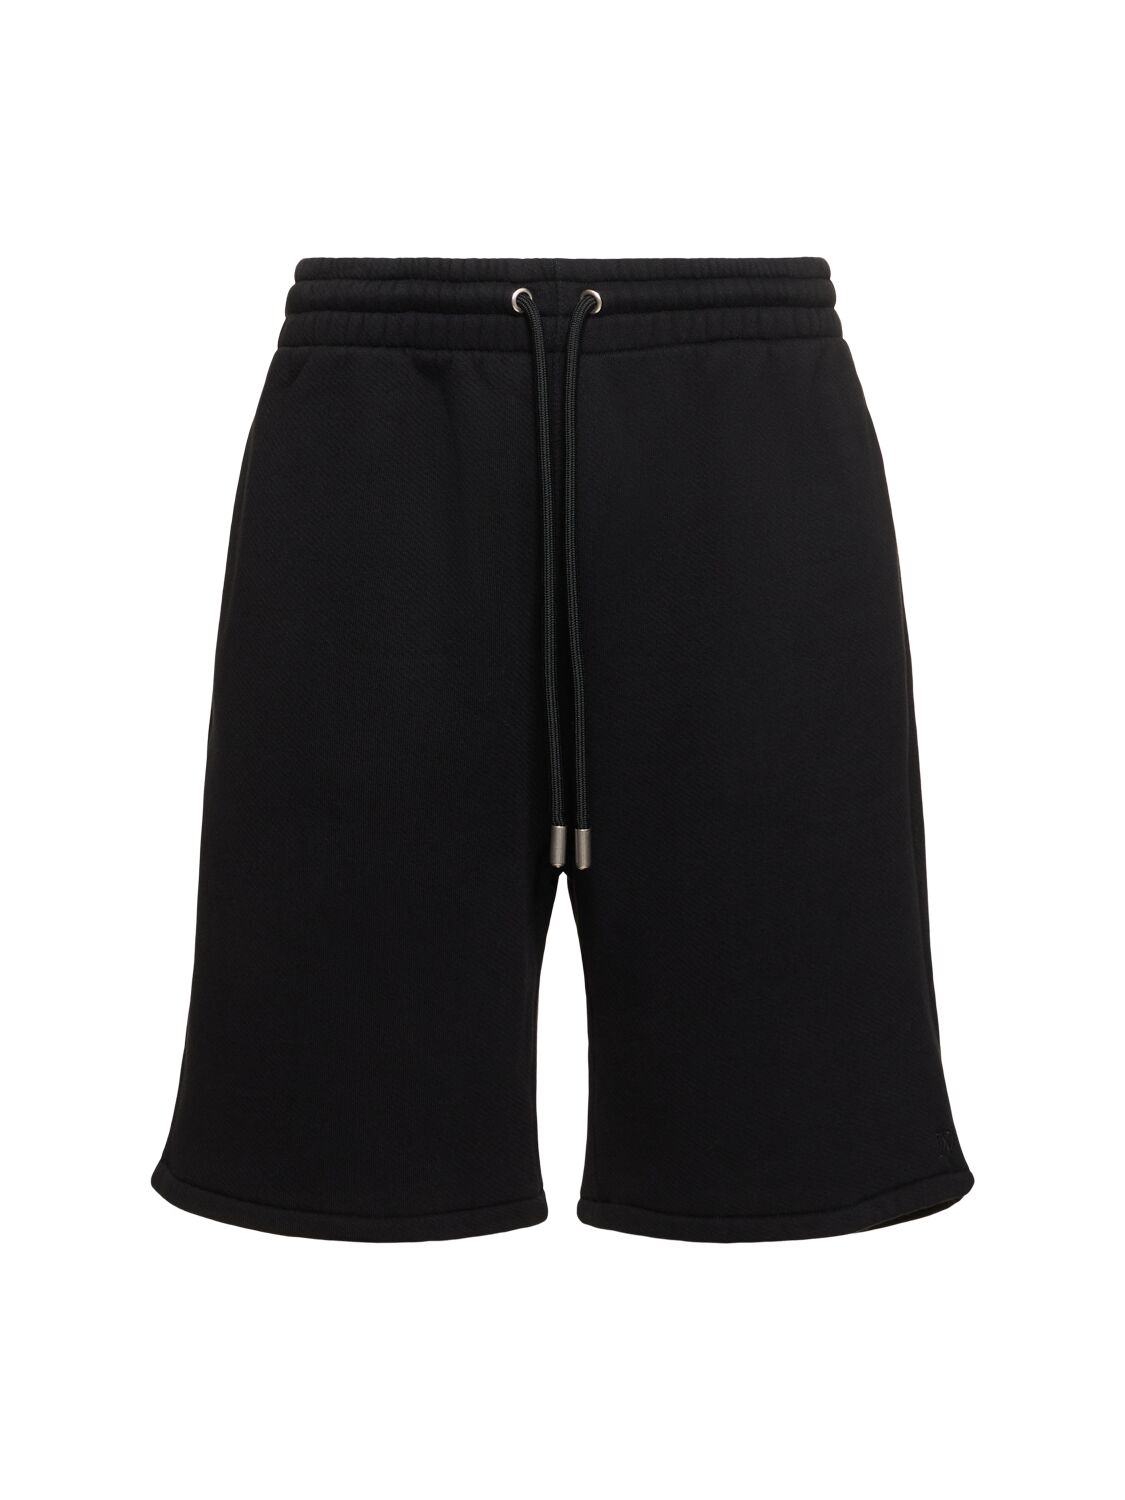 Image of Ow Embroidery Cotton Skate Sweat Shorts